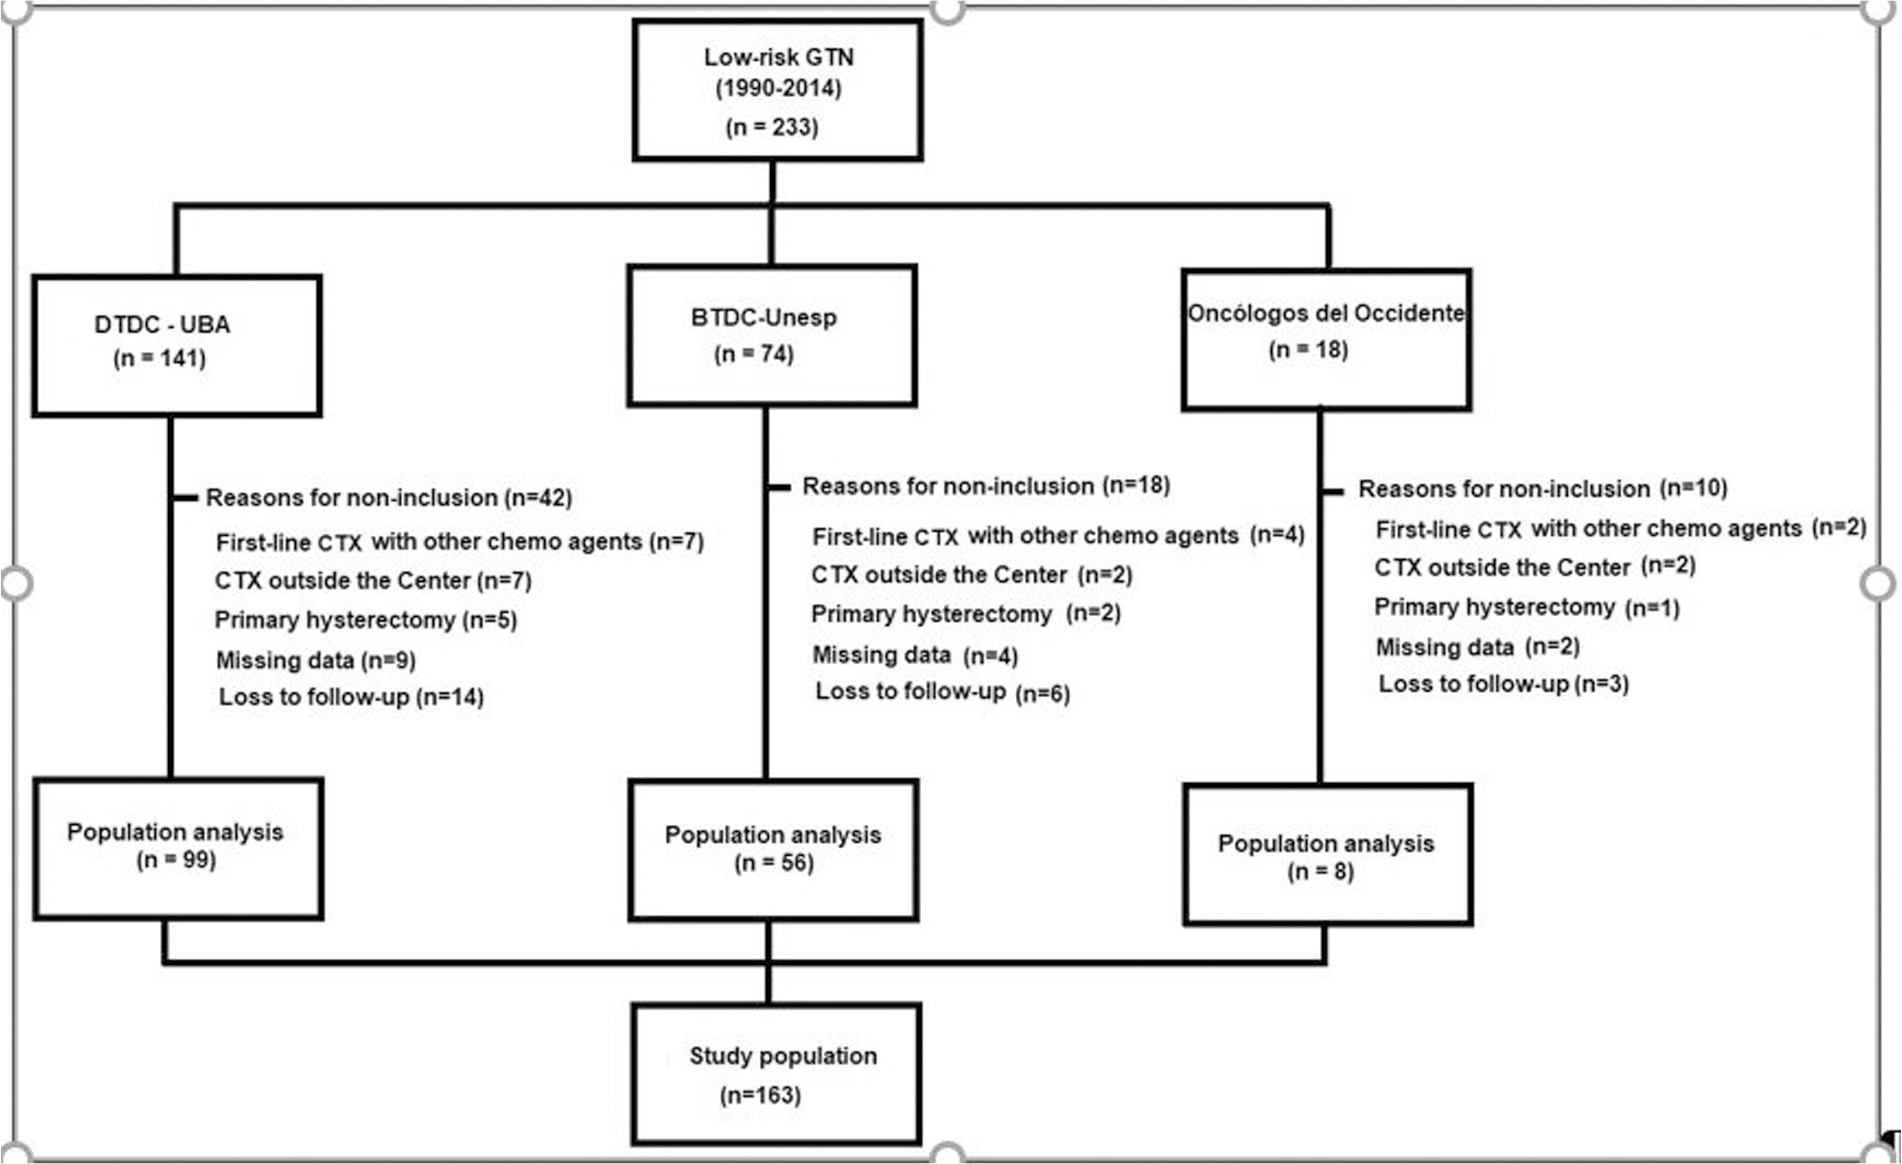 Clinical Presentation, Treatment Outcomes, and Resistance-related Factors in South American Women with Low-risk Postmolar Gestational Trophoblastic Neoplasia